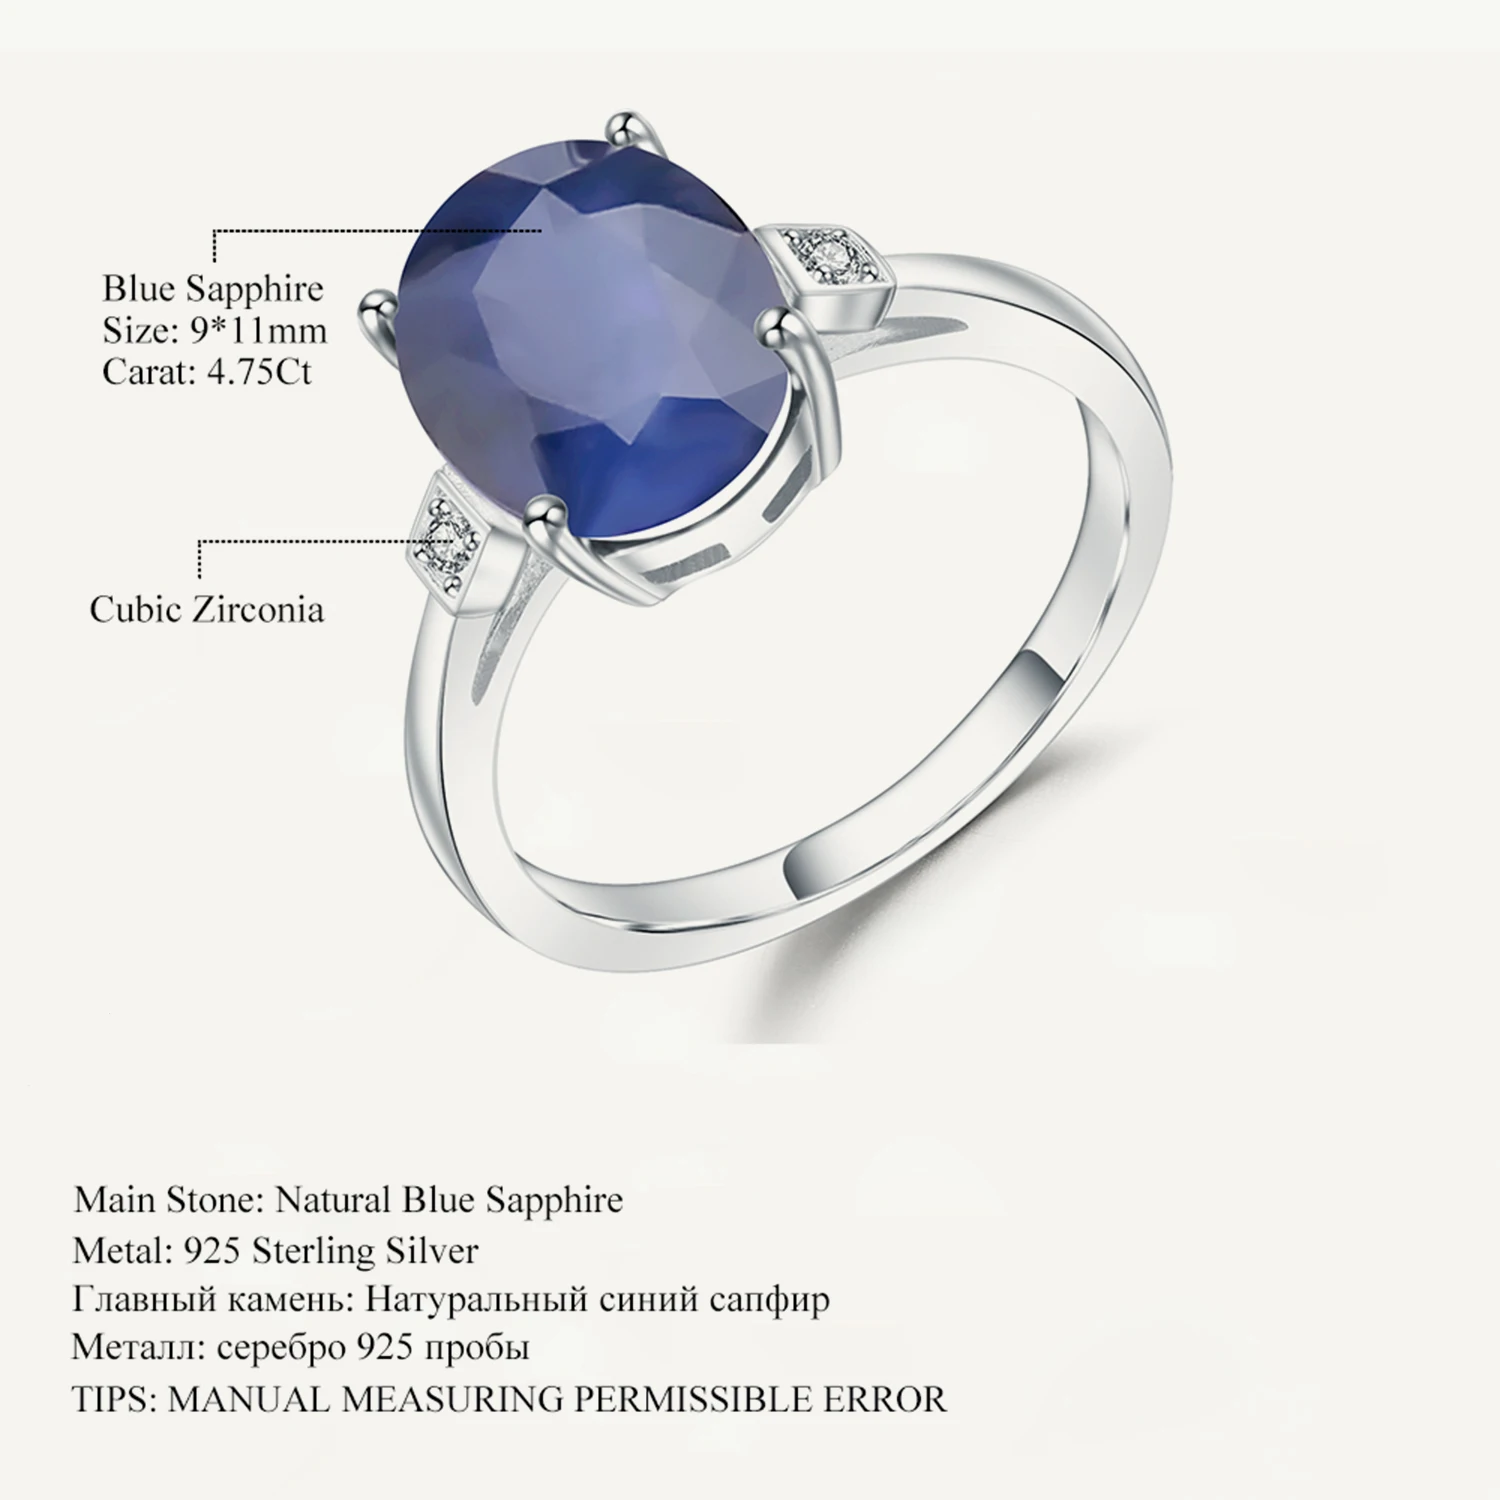 4.78Ct Oval Natural Blue Sapphire Gemstone Ring 925 Sterling Silver Simple Weddi - £57.89 GBP